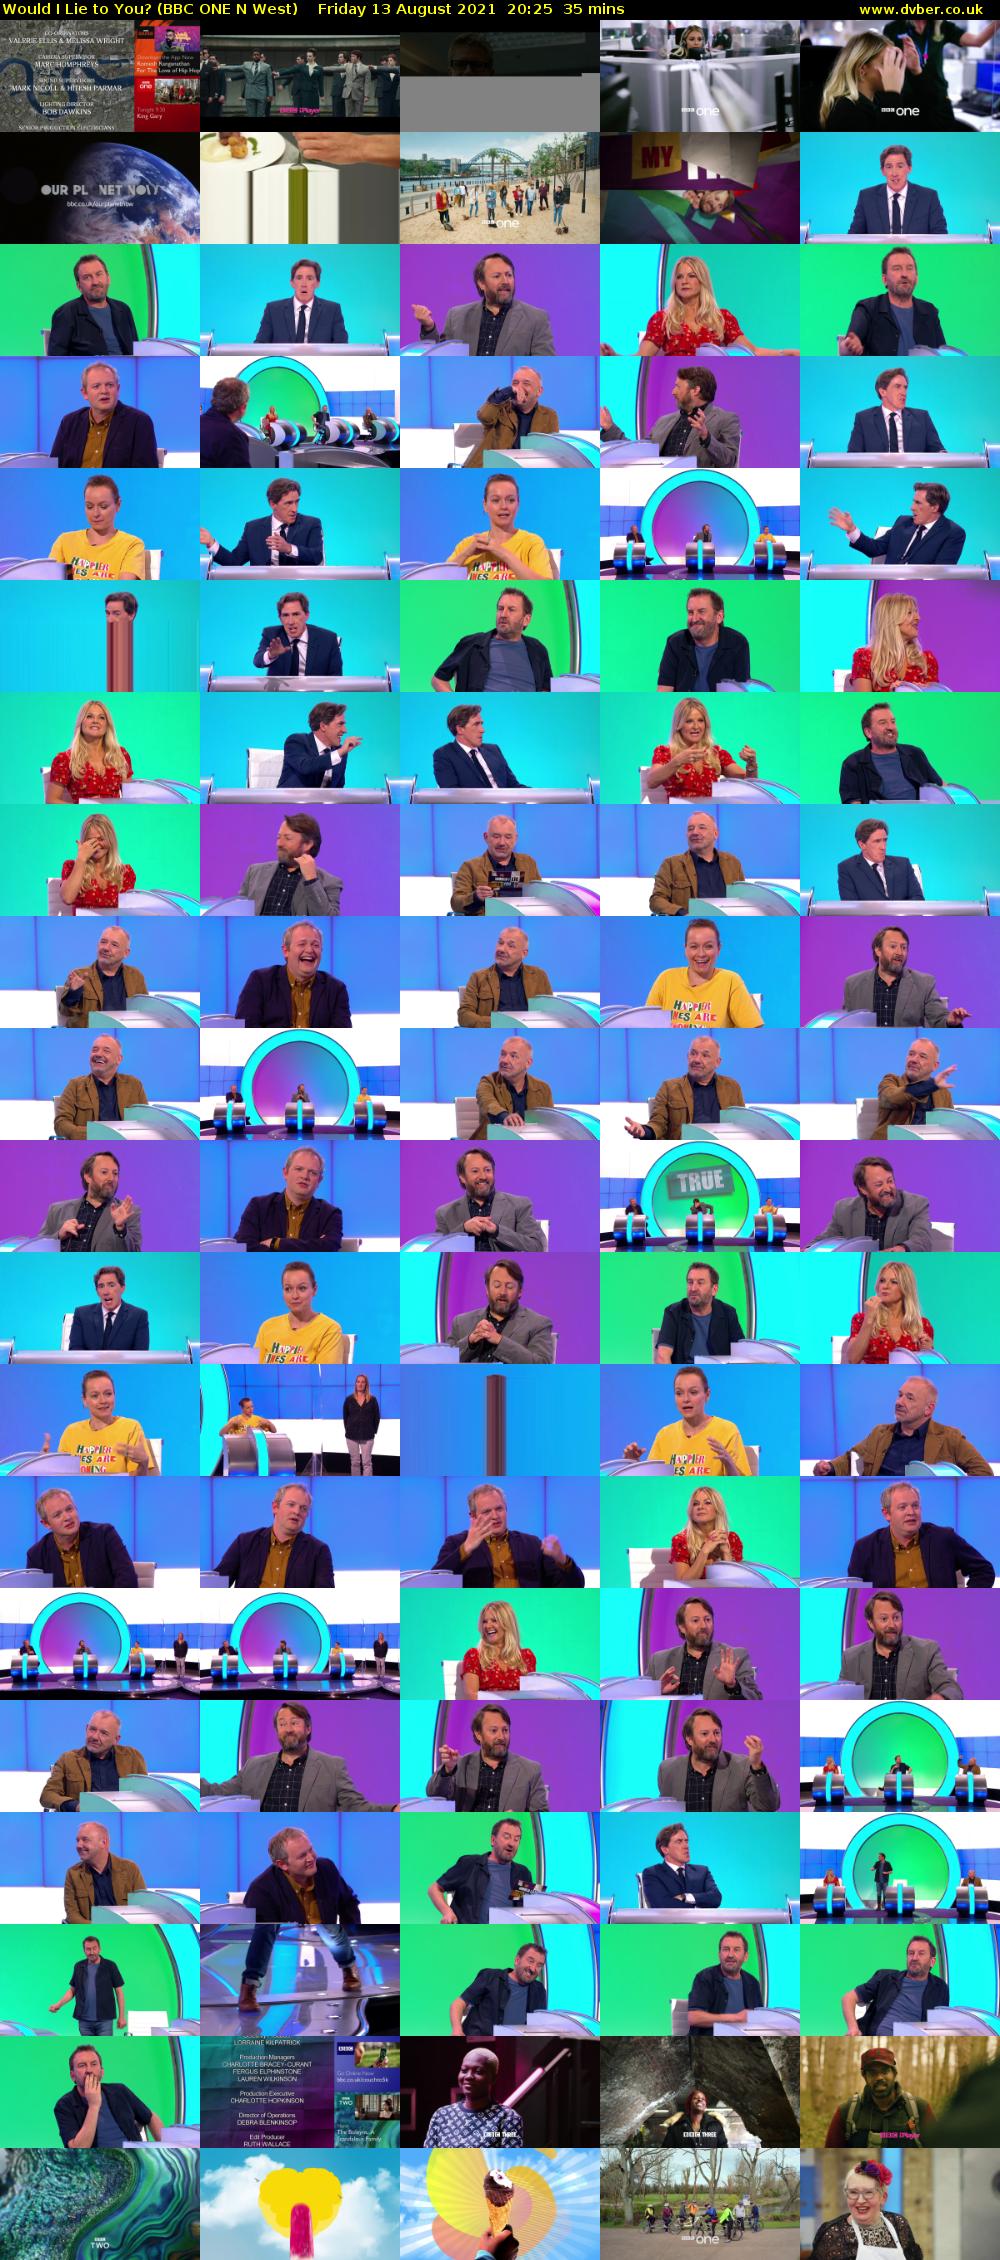 Would I Lie to You? (BBC ONE N West) Friday 13 August 2021 20:25 - 21:00